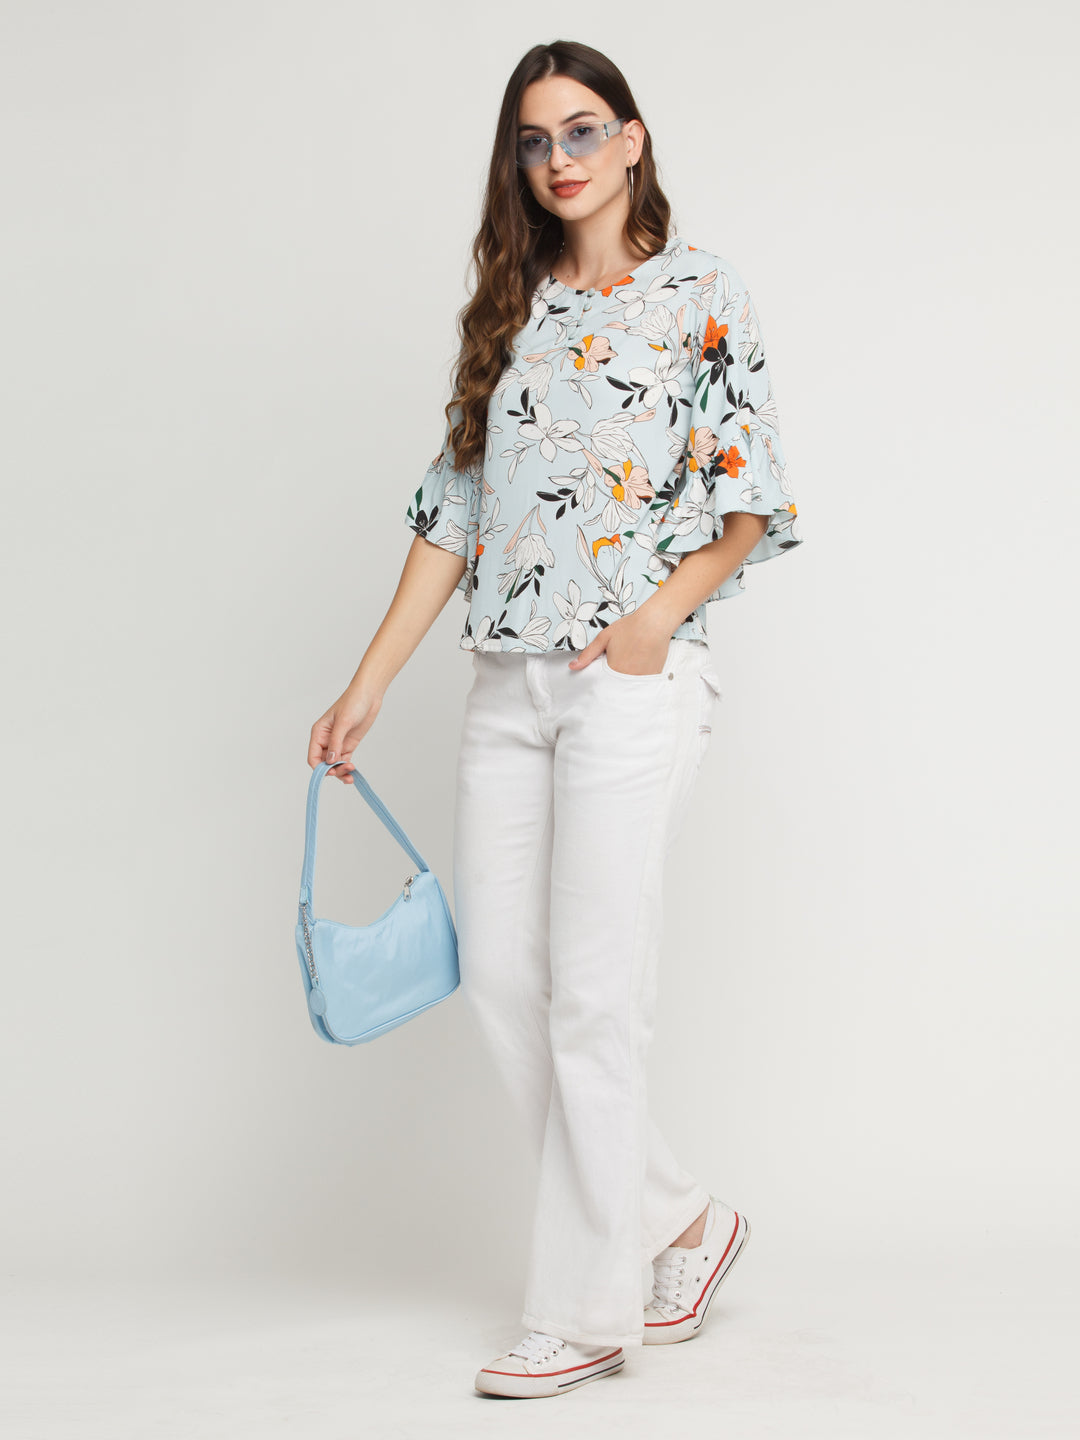 Blue Printed Flared Sleeve Top For Women